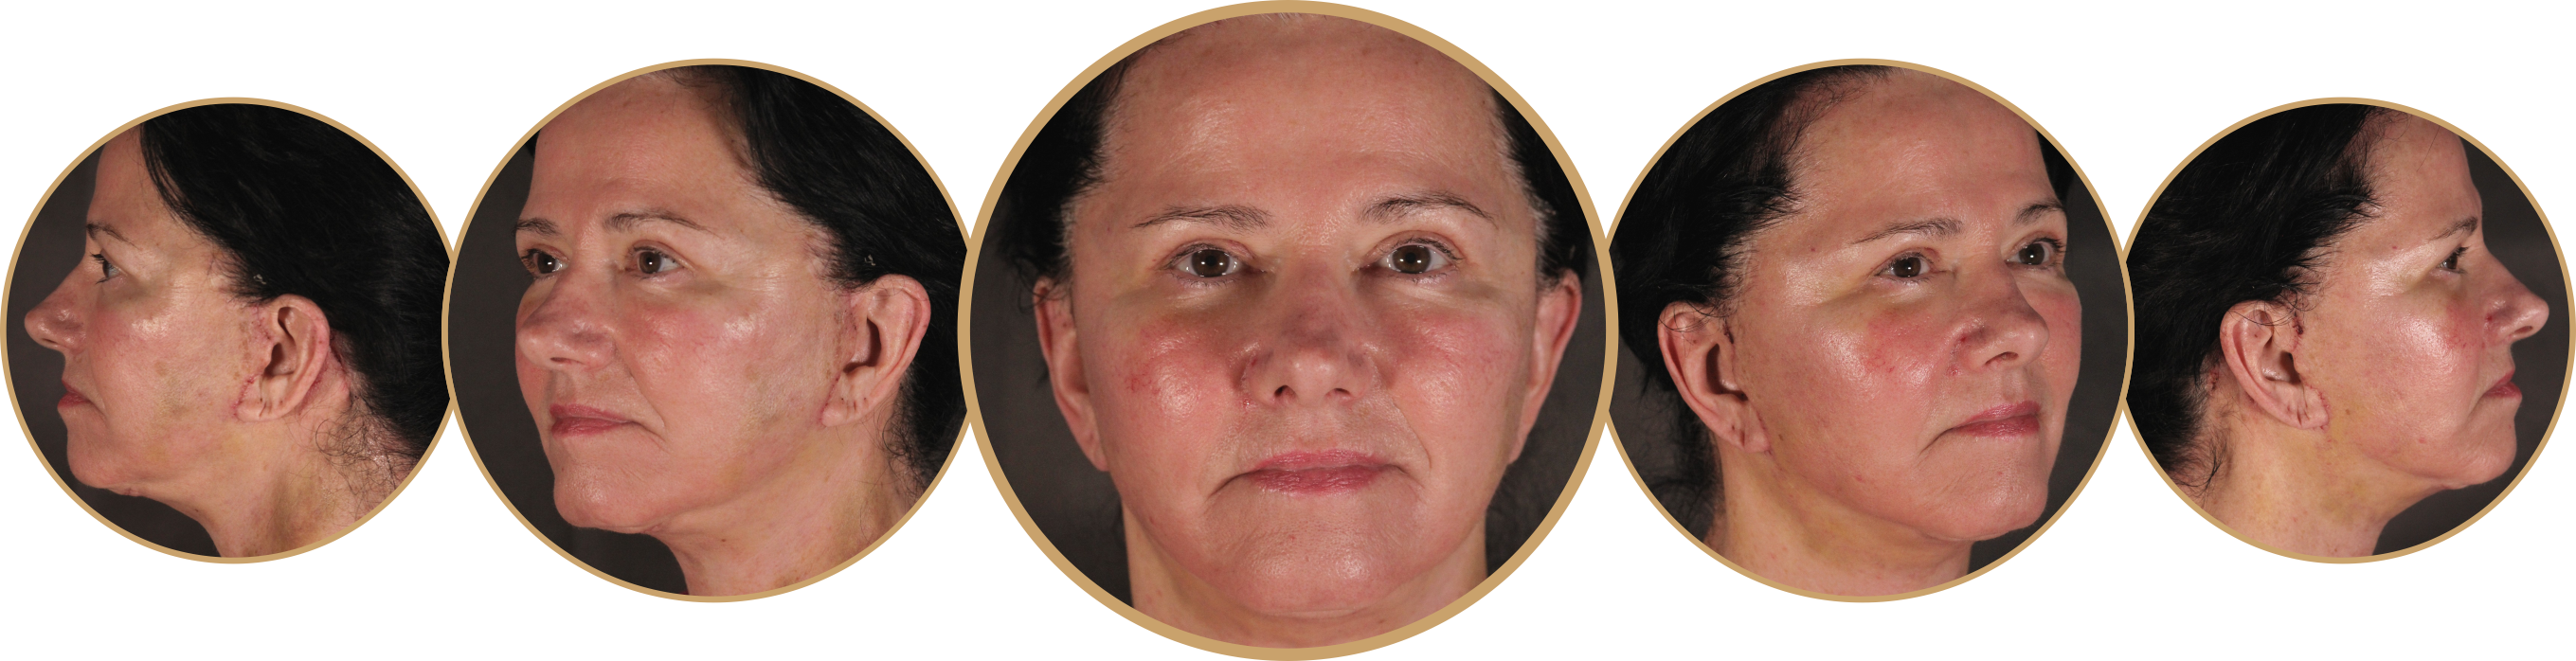 Five perspectives of Patient KVu's face 11 days after surgery.